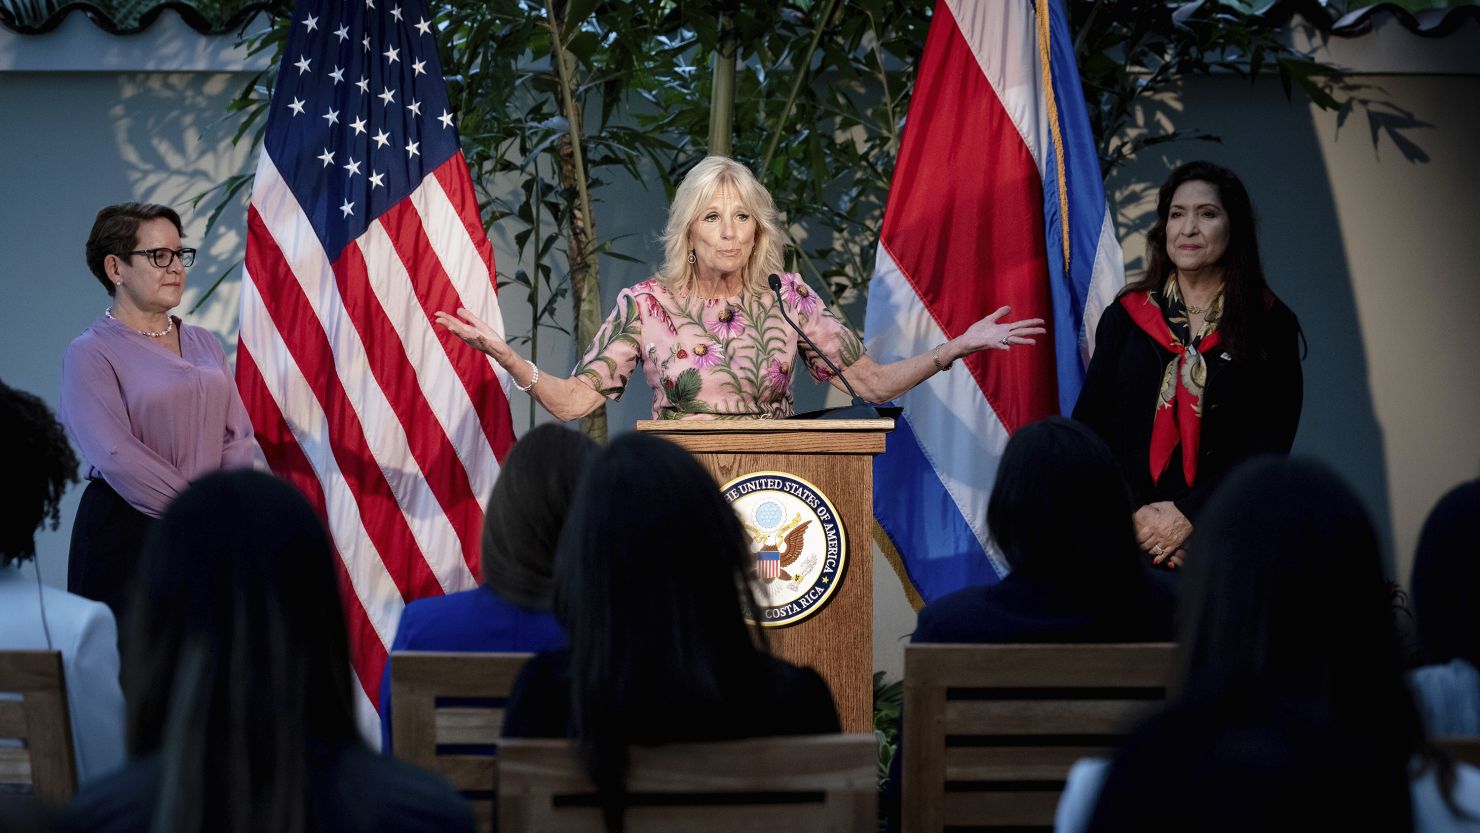 First lady Jill Biden speaks at a women entrepreneurs event at the U.S. Chief of Mission Residence in San José, Costa Rica, Saturday, May 21, 2022. The women in attendance have participated in U.S. State Department-sponsored programs focused on entrepreneurship. 